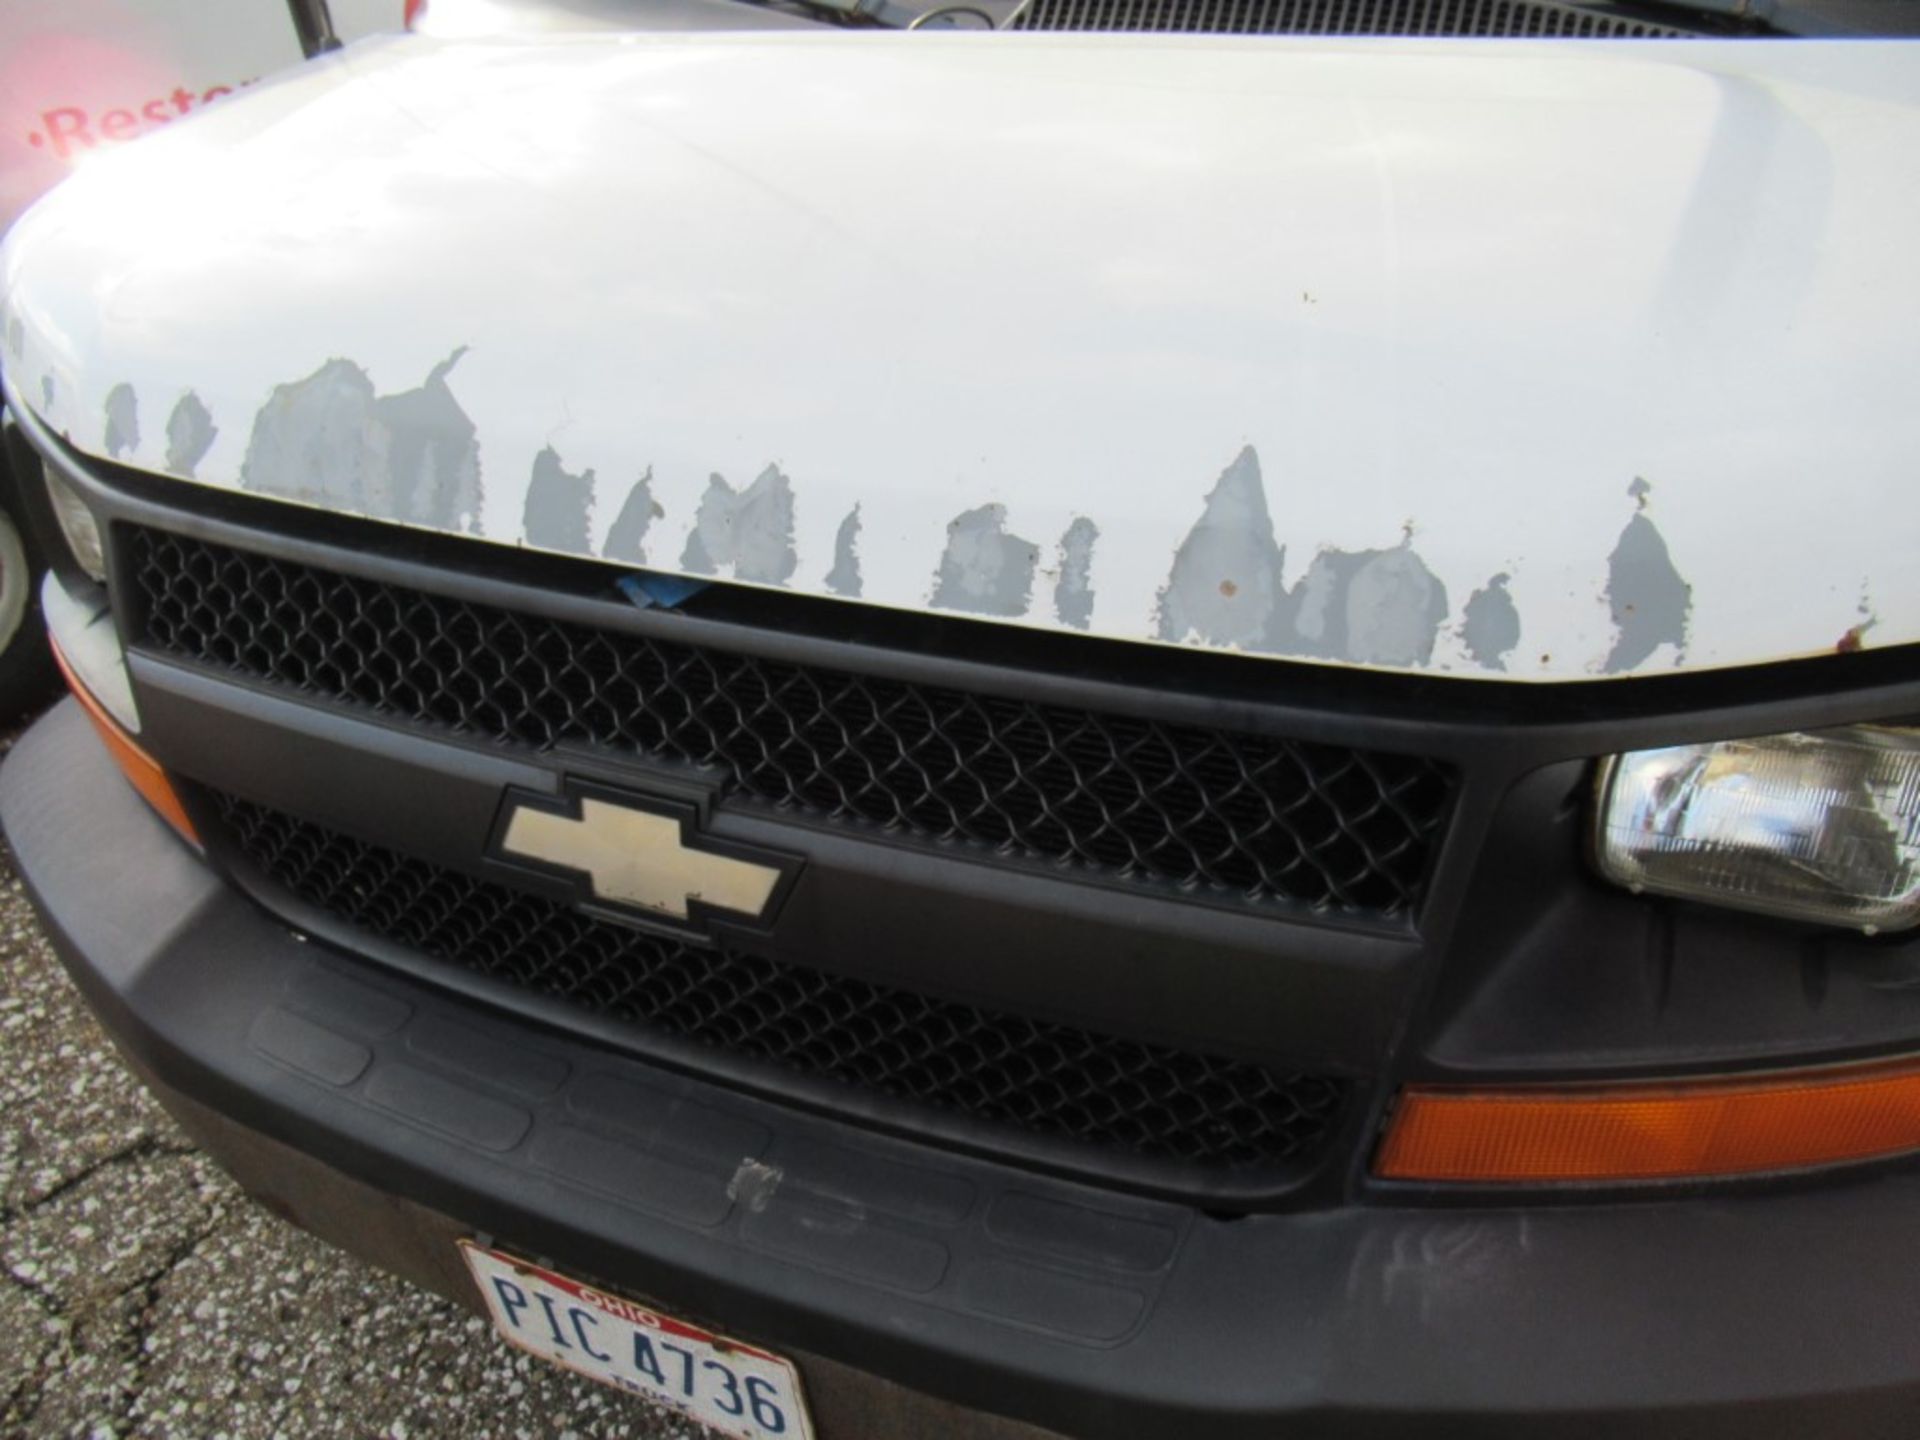 2005 Chevrolet Express Cargo Van, VIN 1GCFG15X651257294, Automatic, AC, AM/FM, Towing, Cracked - Image 20 of 33